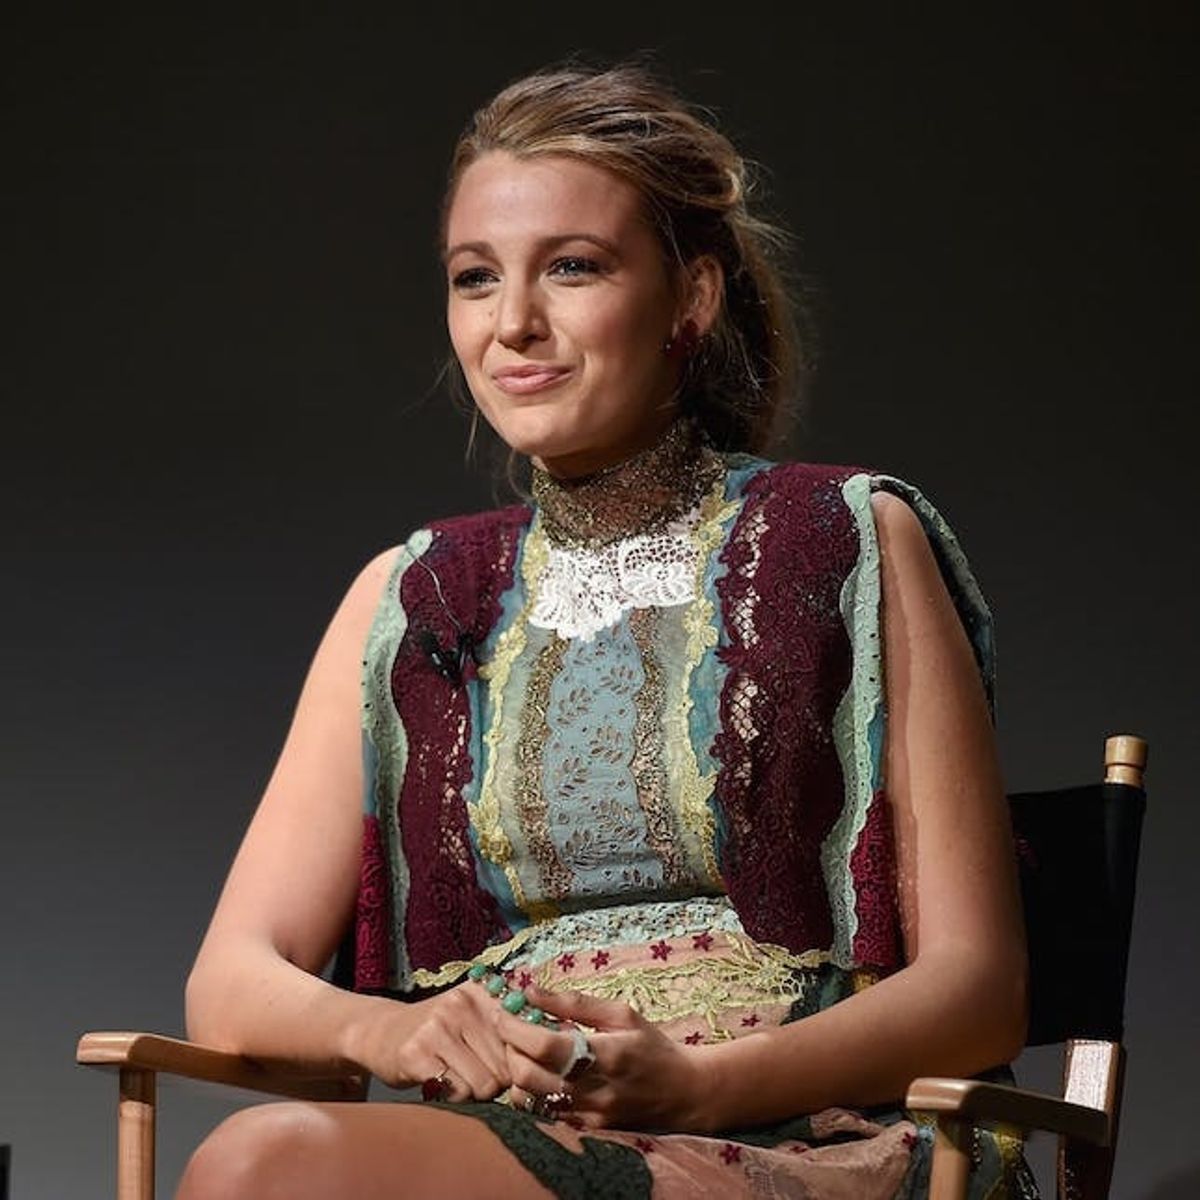 Why Blake Lively Is Shutting Down Lifestyle Site Preserve